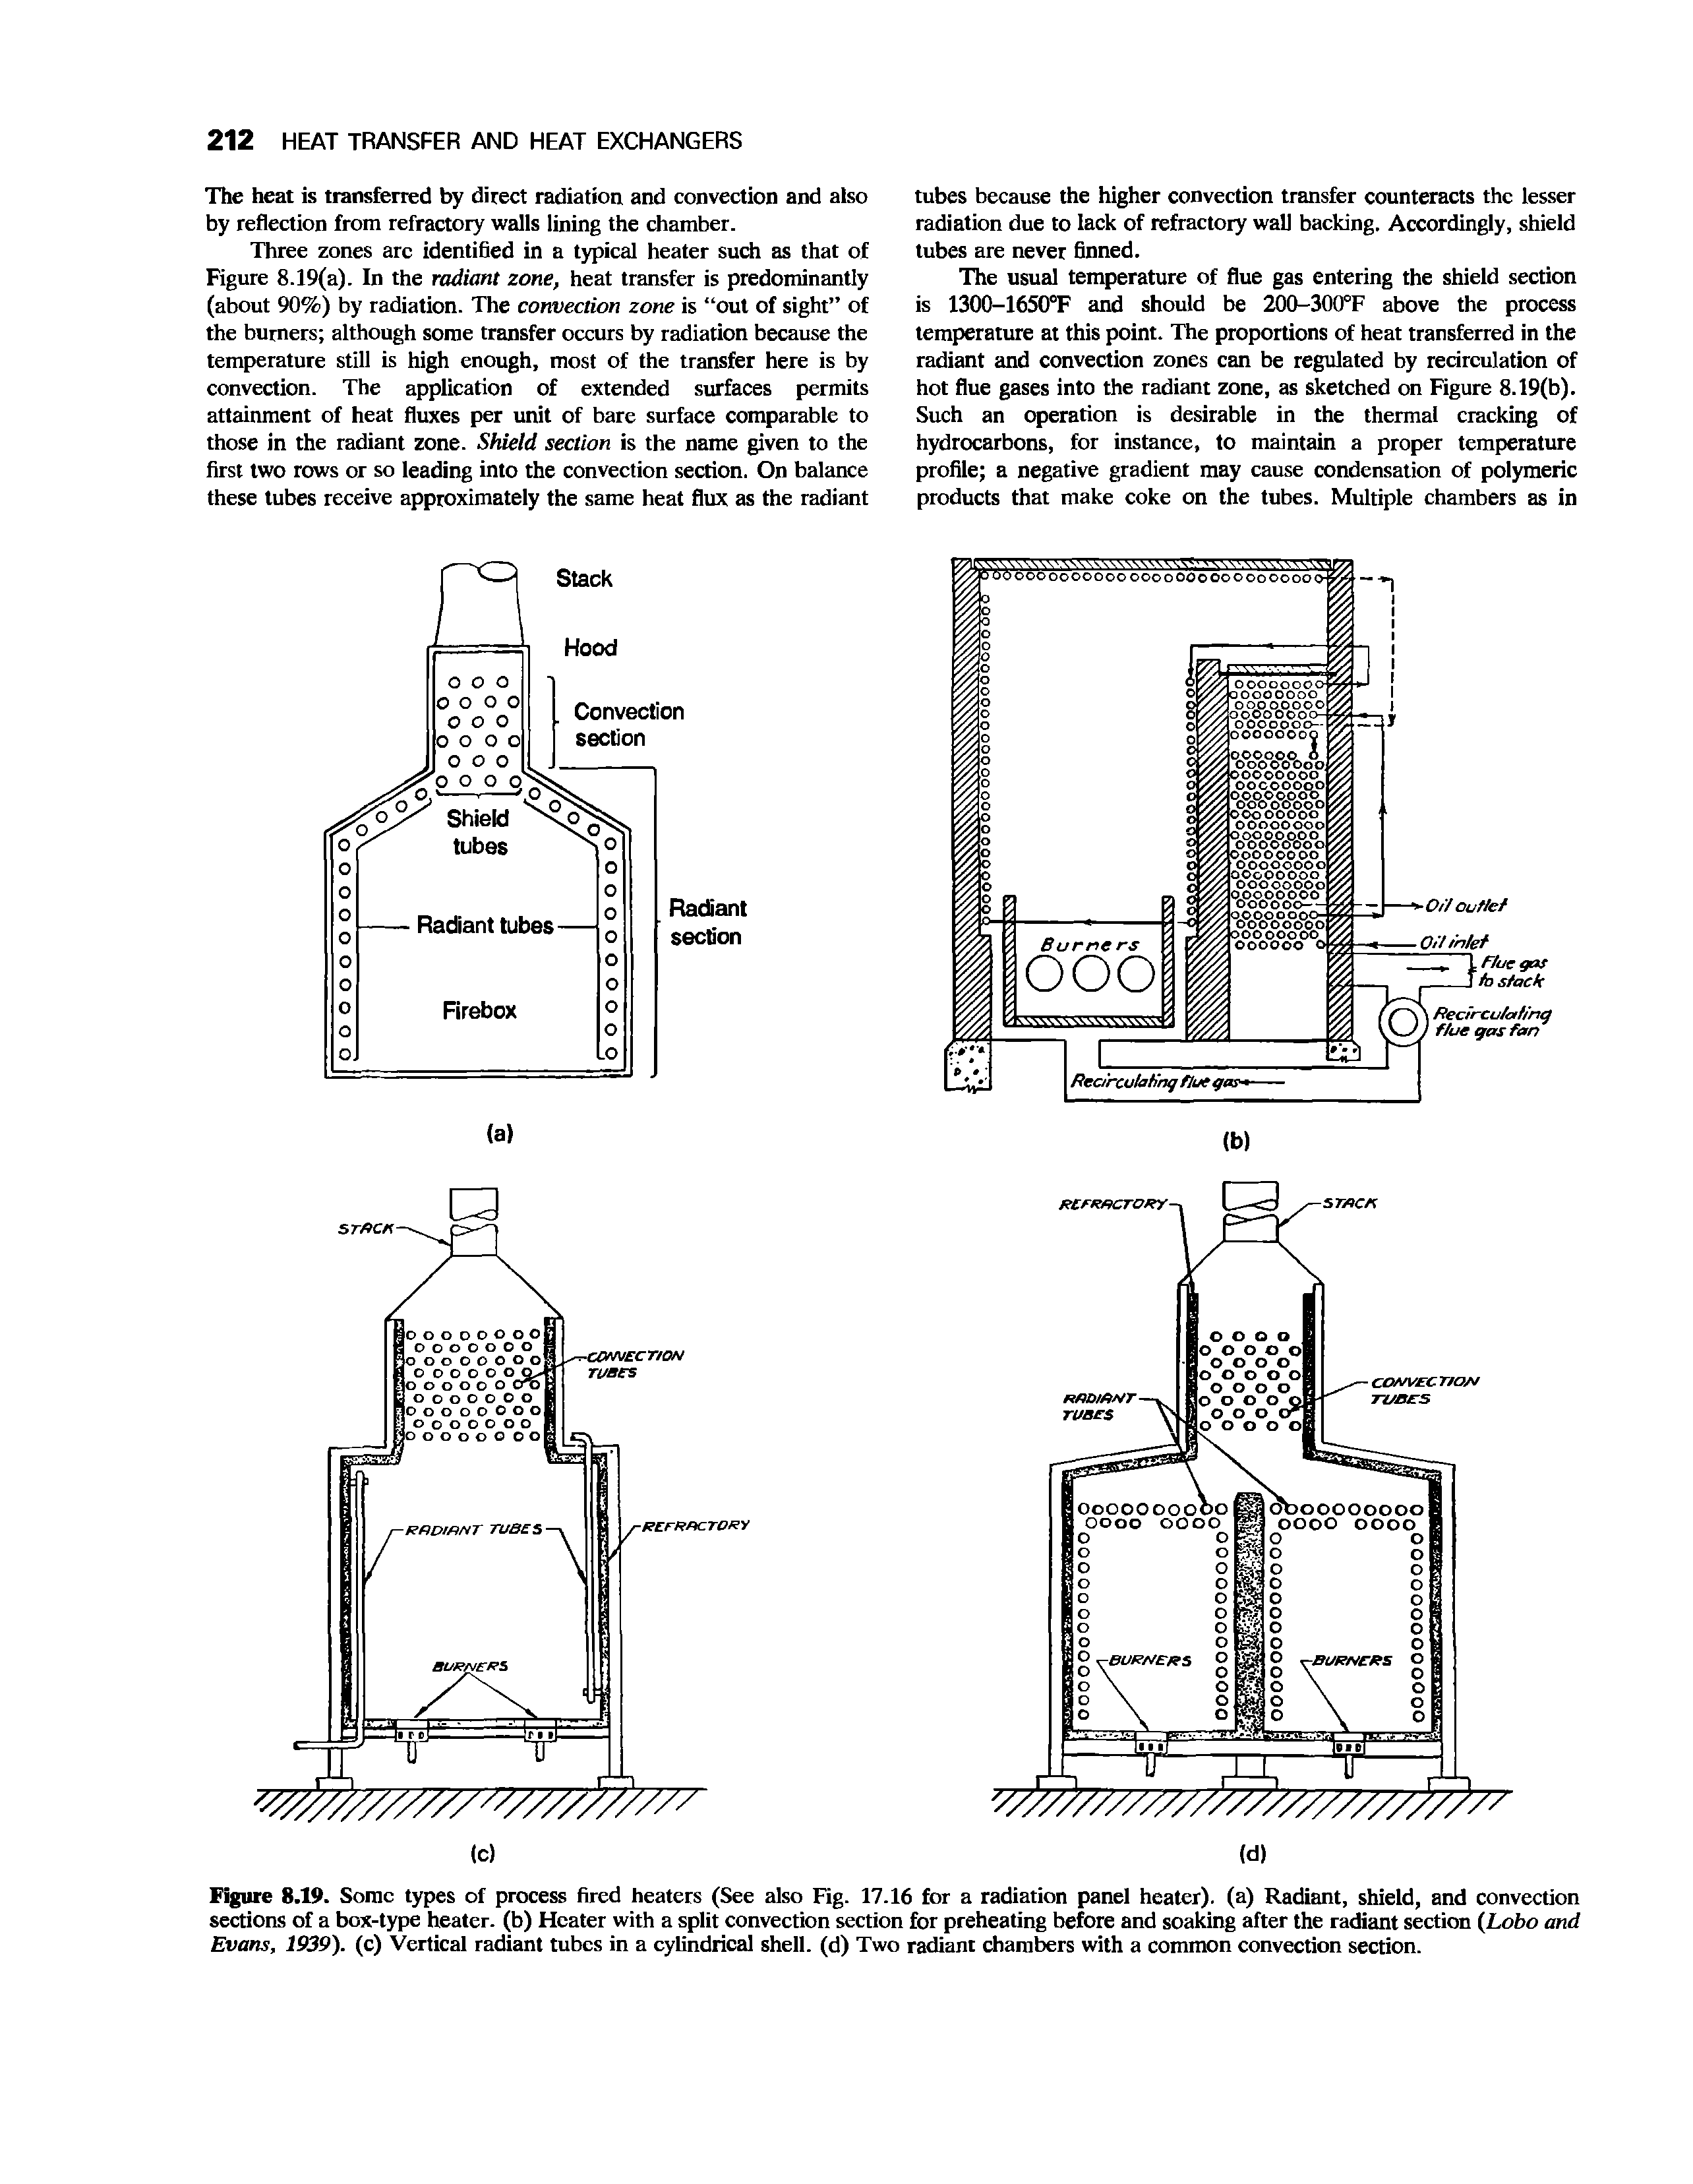 Figure 8.19. Some types of process fired heaters (See also Fig. 17.16 for a radiation panel heater), (a) Radiant, shield, and convection sections of a box-type heater, (b) Heater with a split convection section for preheating before and soaking after the radiant section (Lobo and Evans, 1939). (c) Vertical radiant tubes in a cylindrical shell, (d) Two radiant chambers with a common convection section.